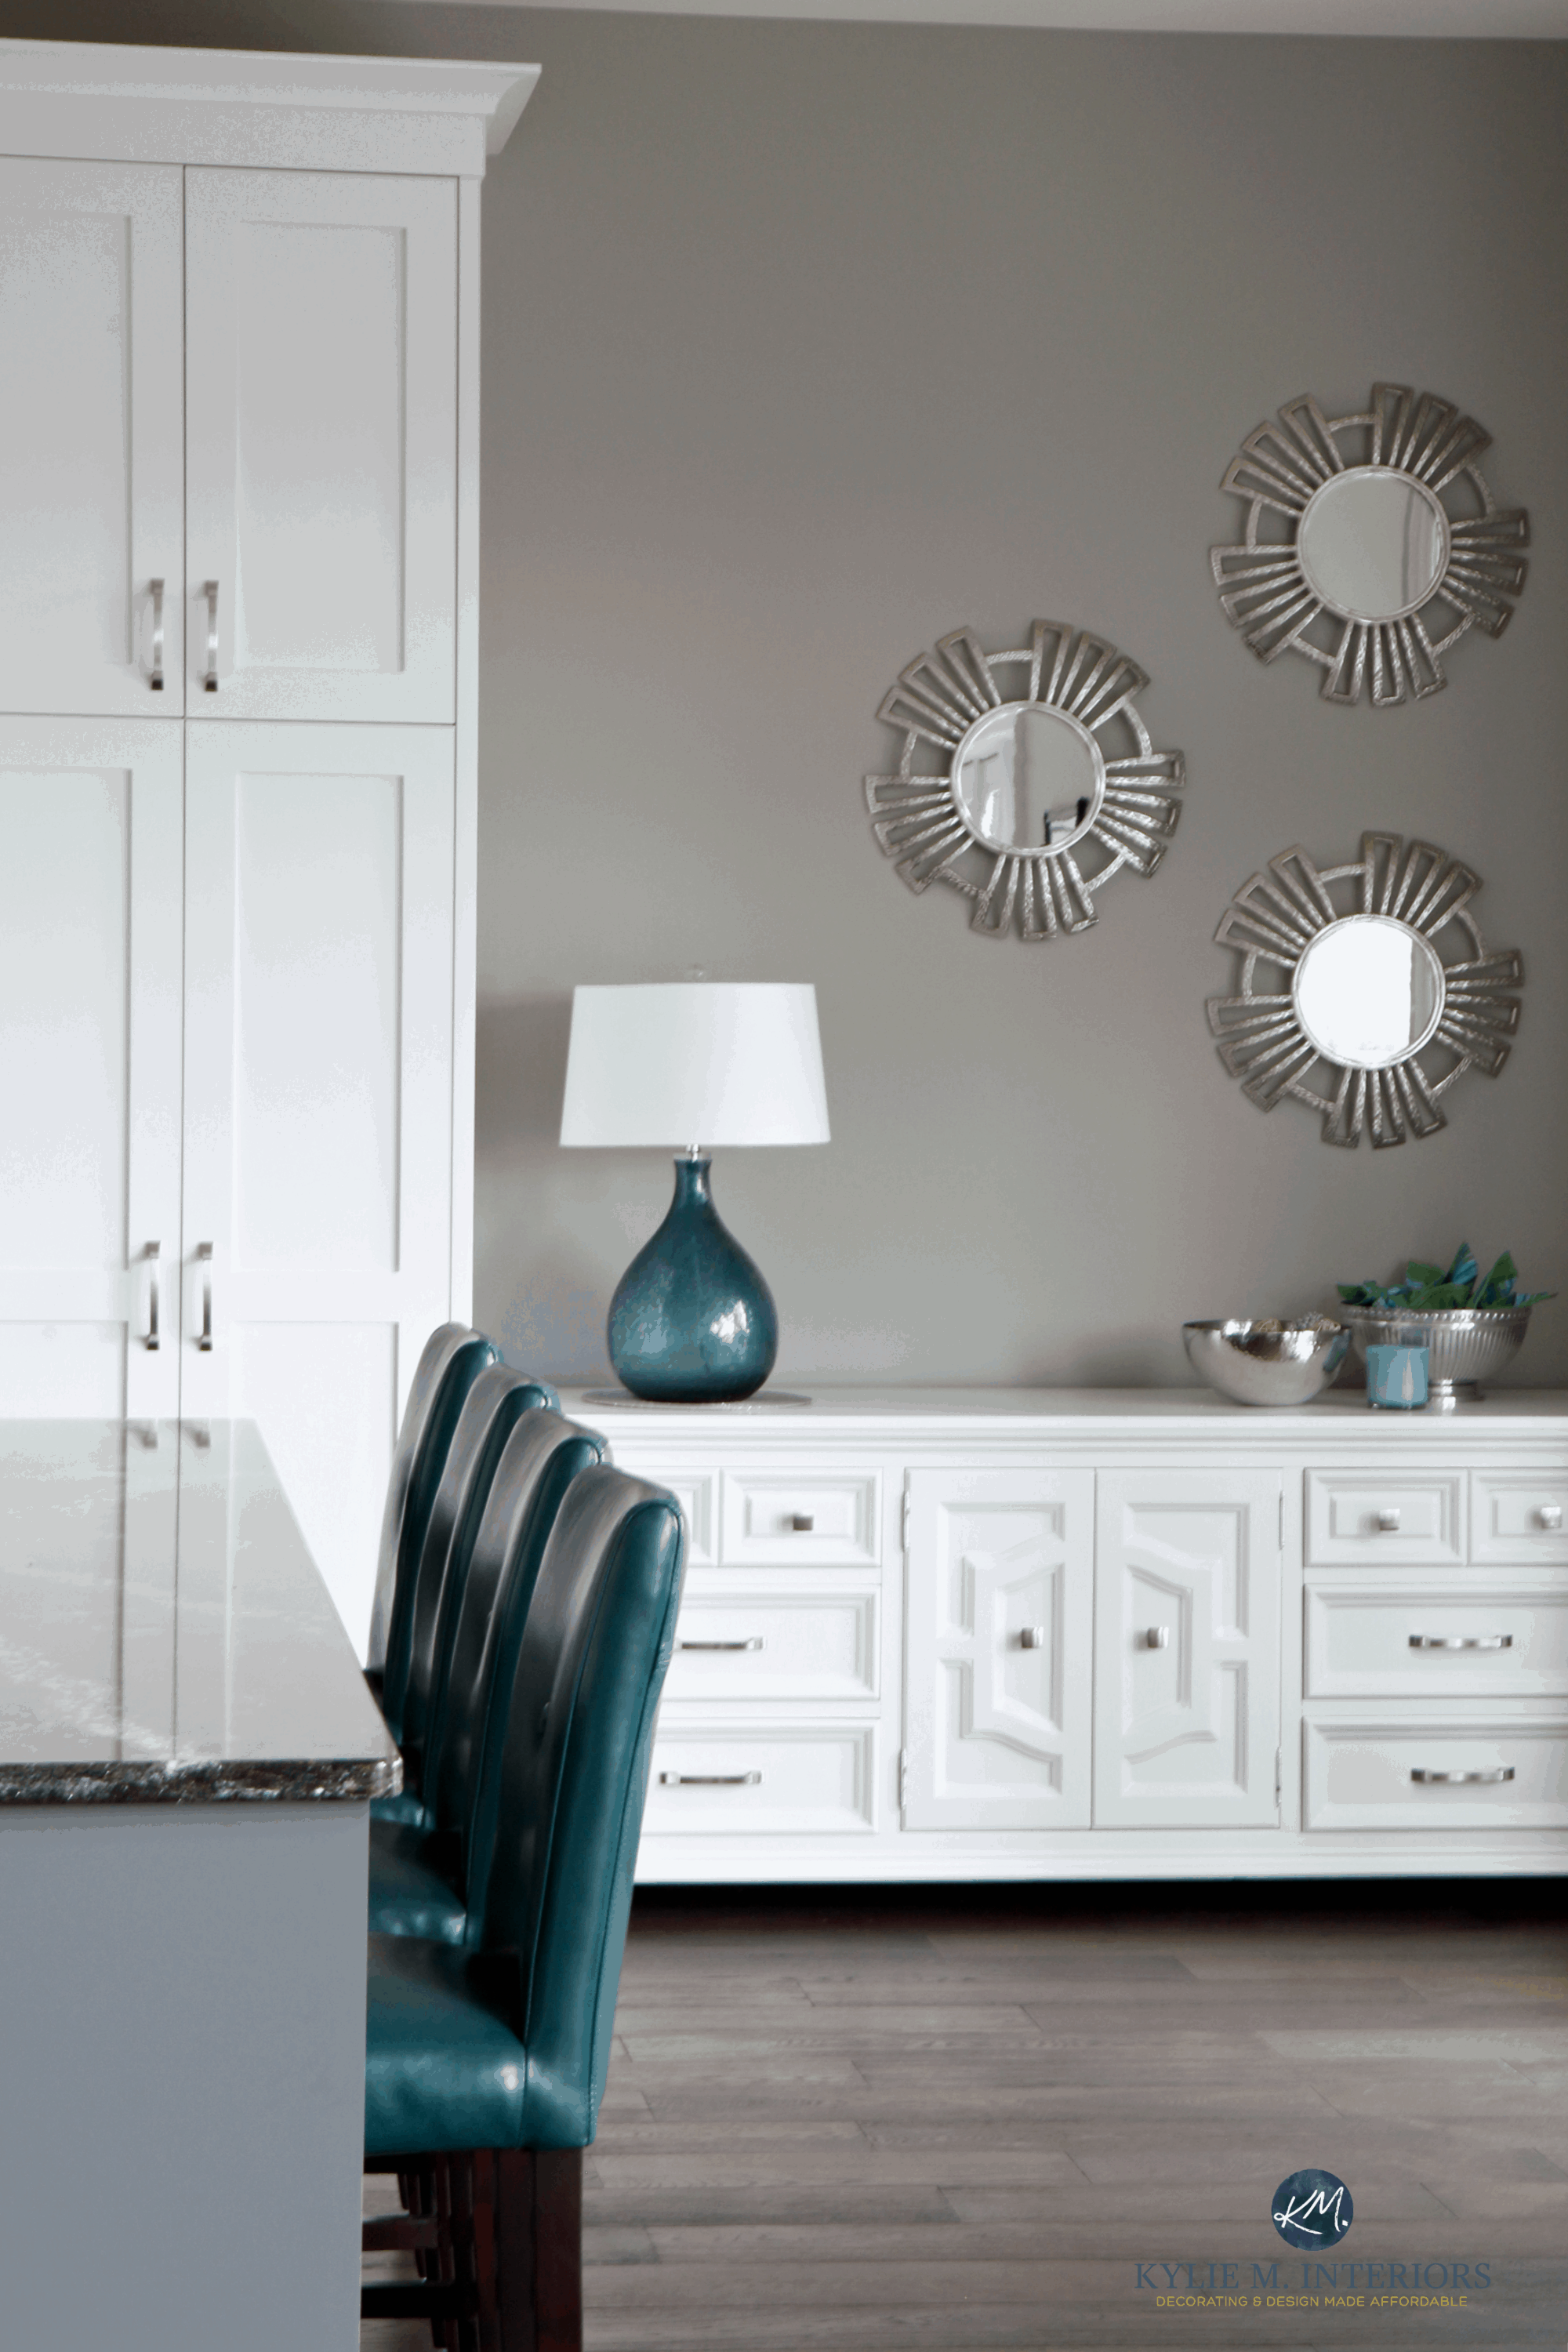 A dining room with dark greige on the walls, white furniture, and teal accents in the accessories.